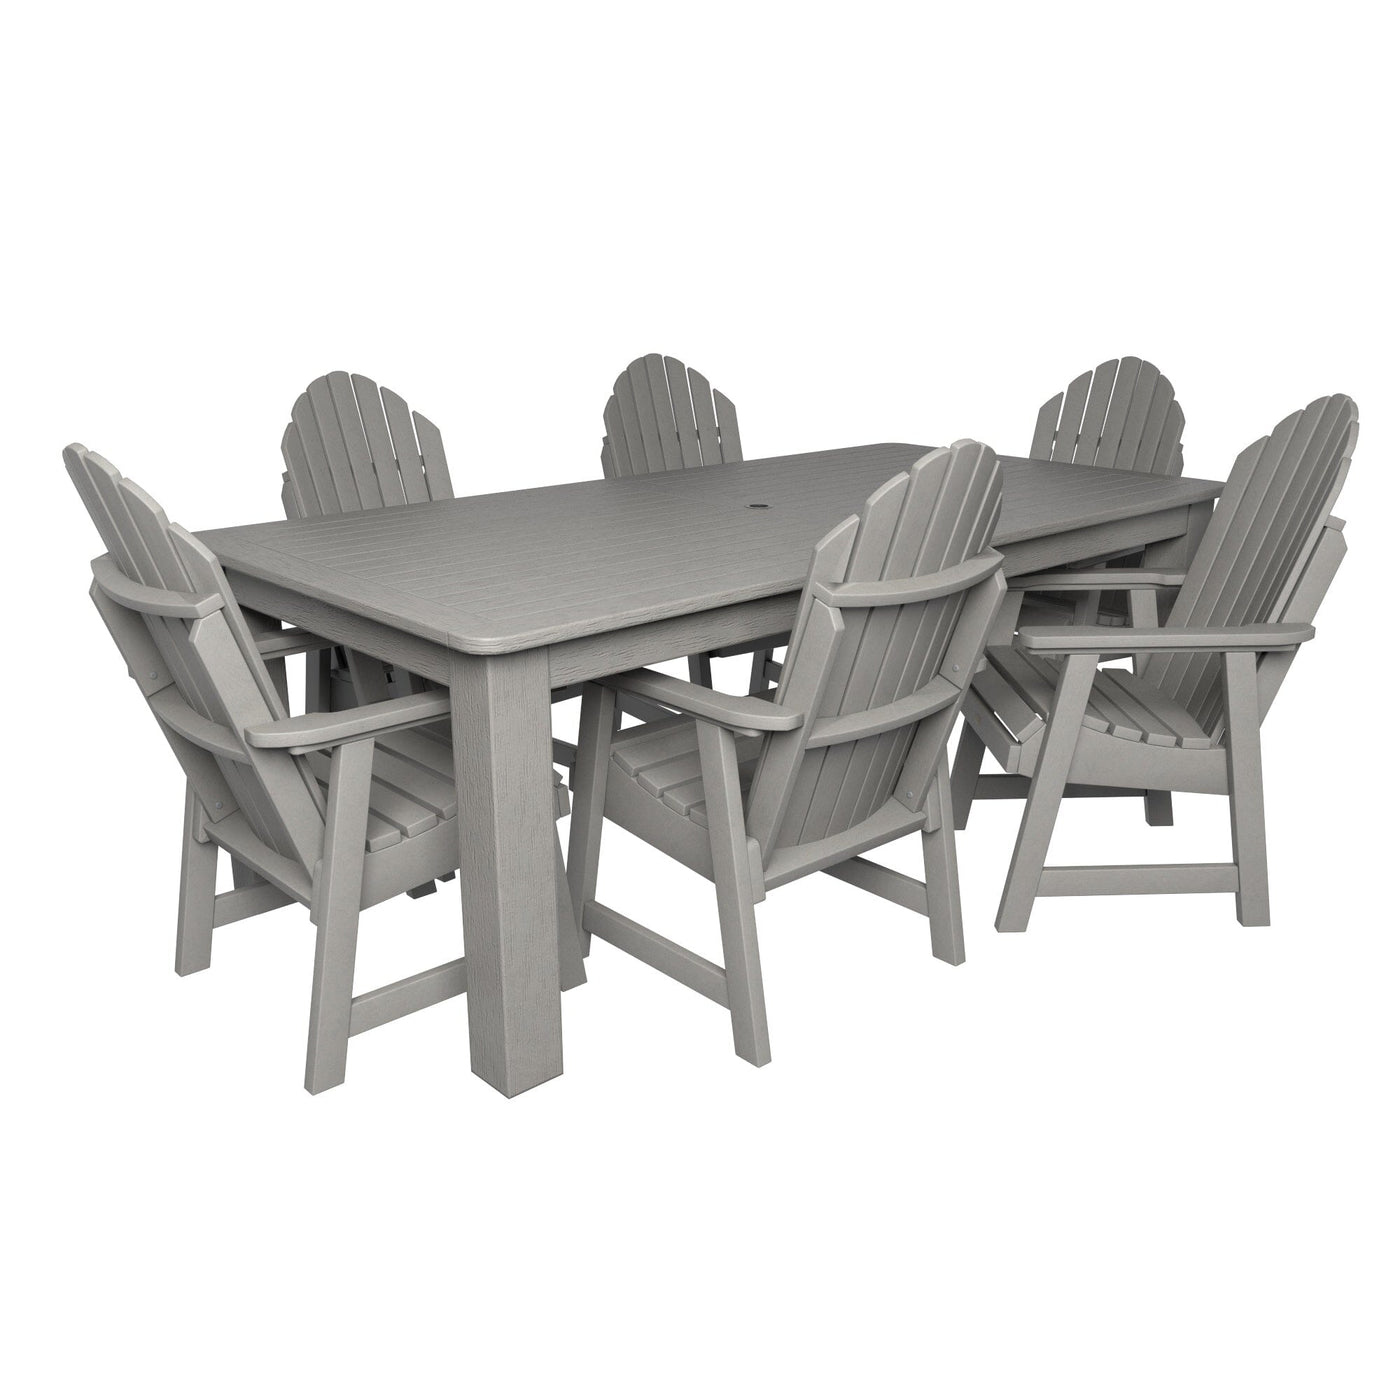 Hamilton 7pc Rectangular Outdoor Dining Set 42in x 84in - Dining Height Dining Highwood USA Harbor Gray 